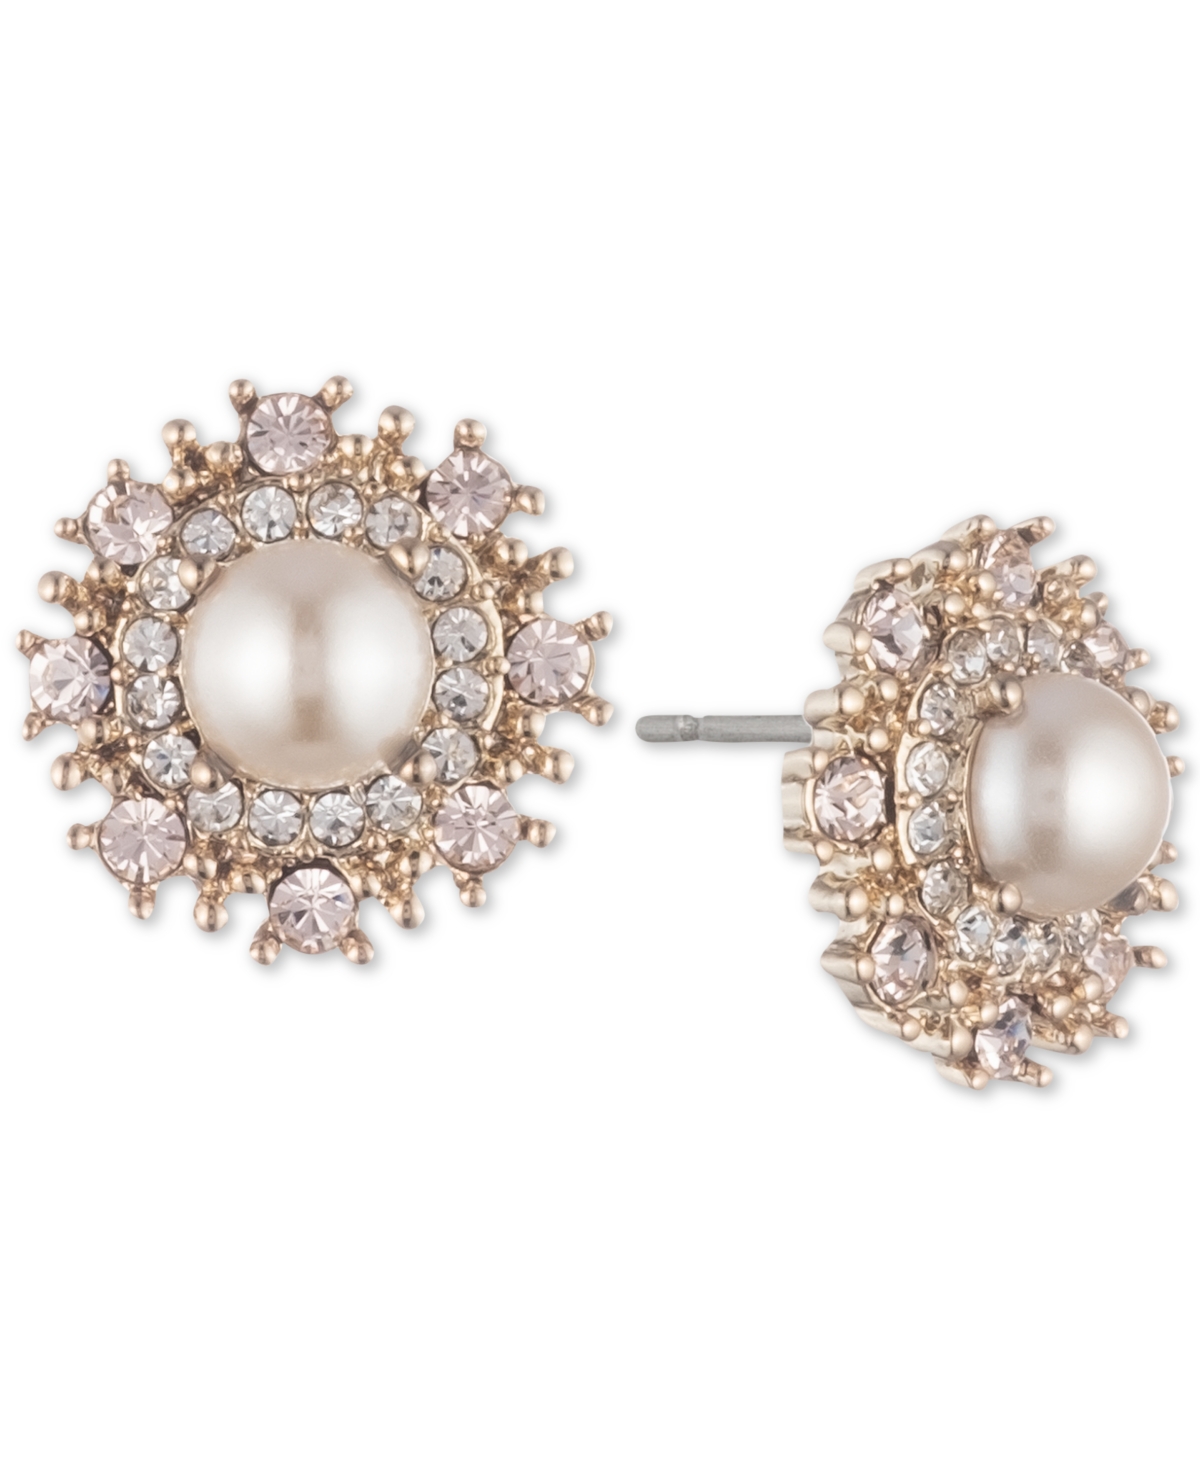 Gold-Tone Cubic Zirconia & Imitation Pearl Button Earrings - Gold